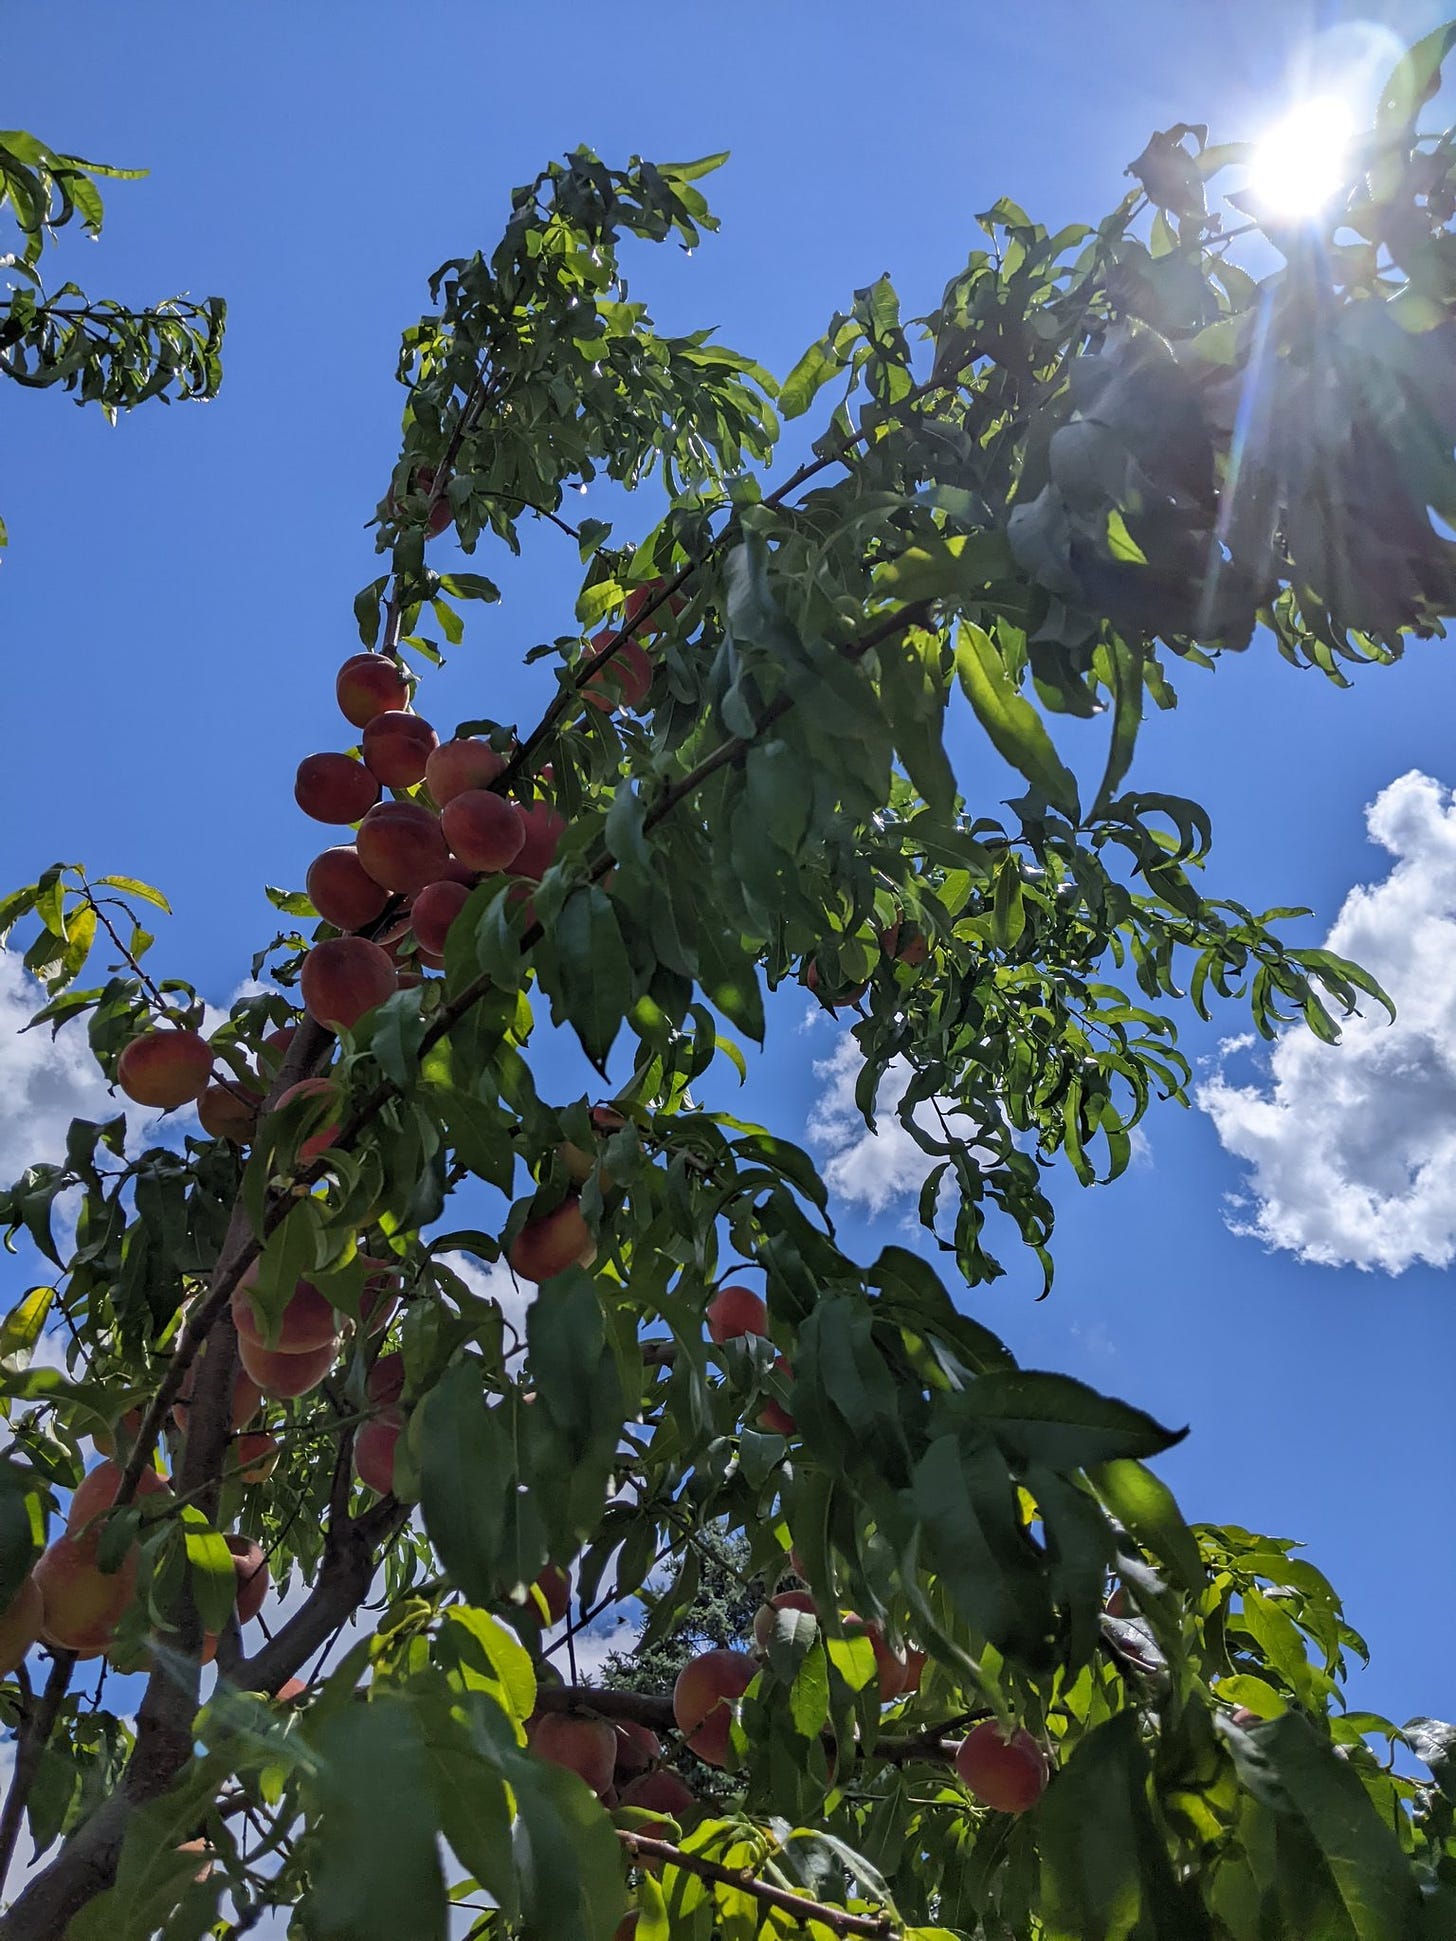 Picture of a peach tree from underneath it's branches that have fruit on them against a blue sky with clouds.